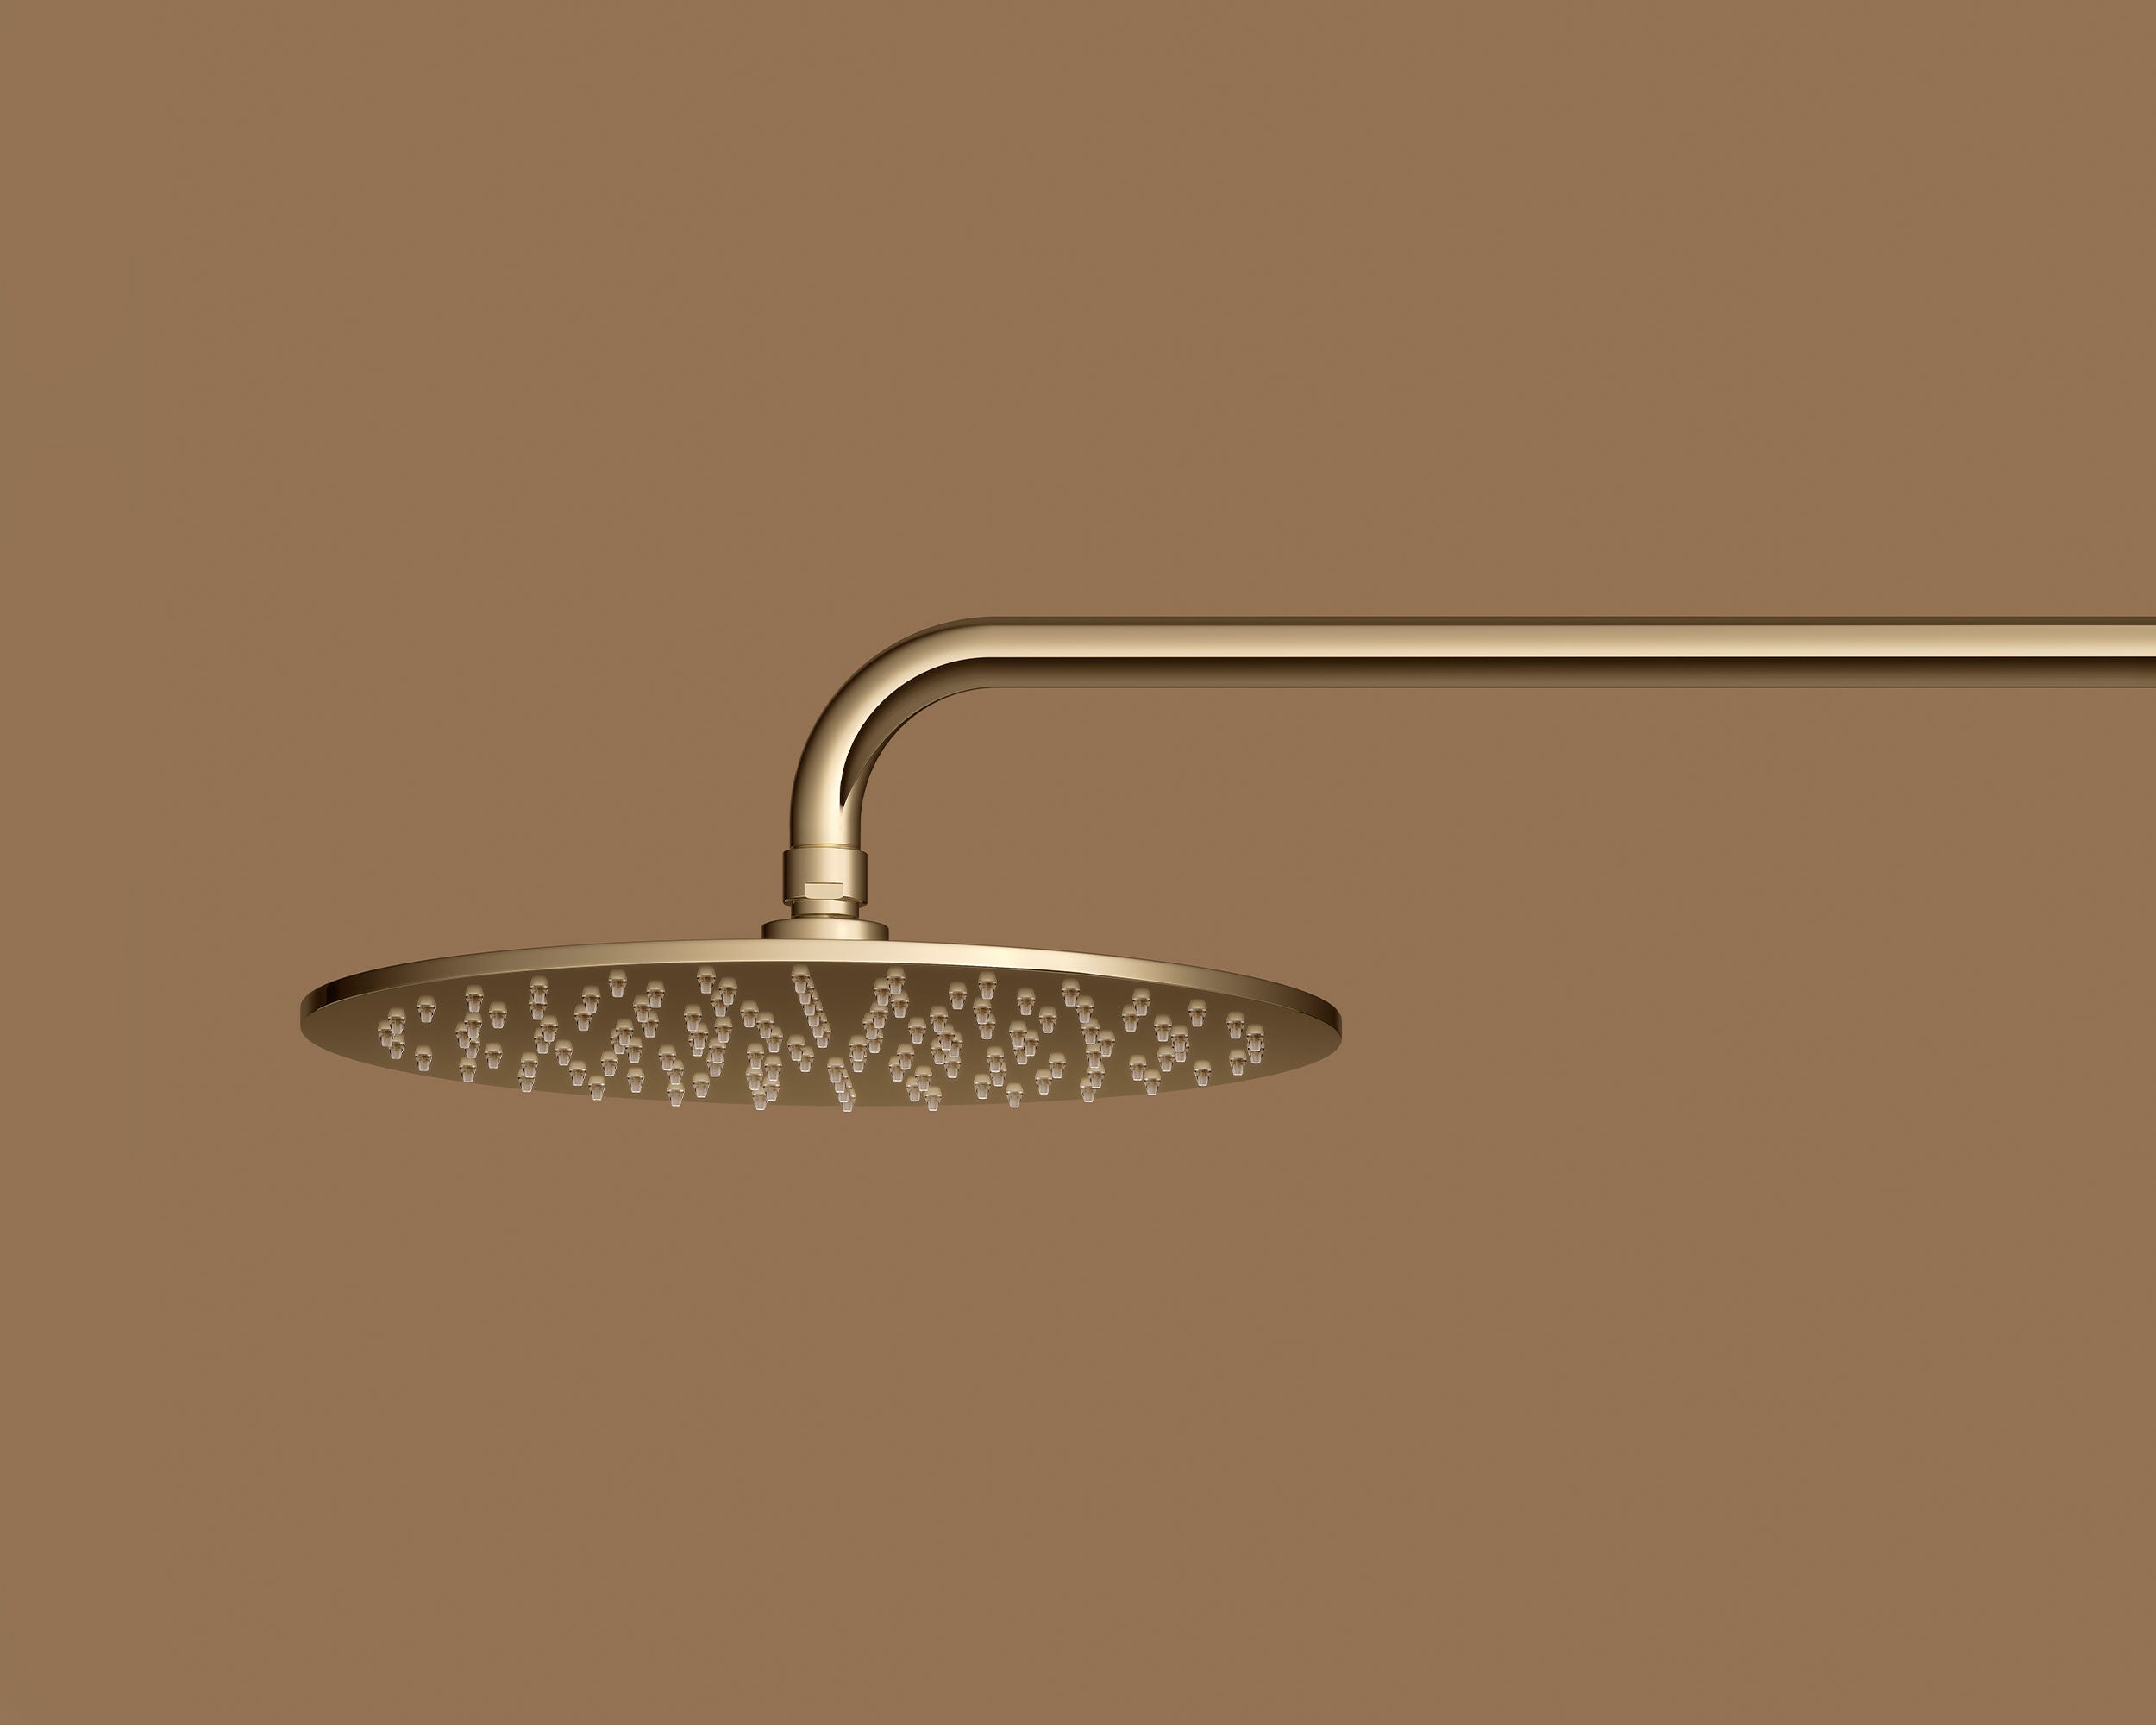 CONCEALED-HEAD-SHOWER-WALL-MOUNT-SIDEVIEW-Brass-Polished.jpg